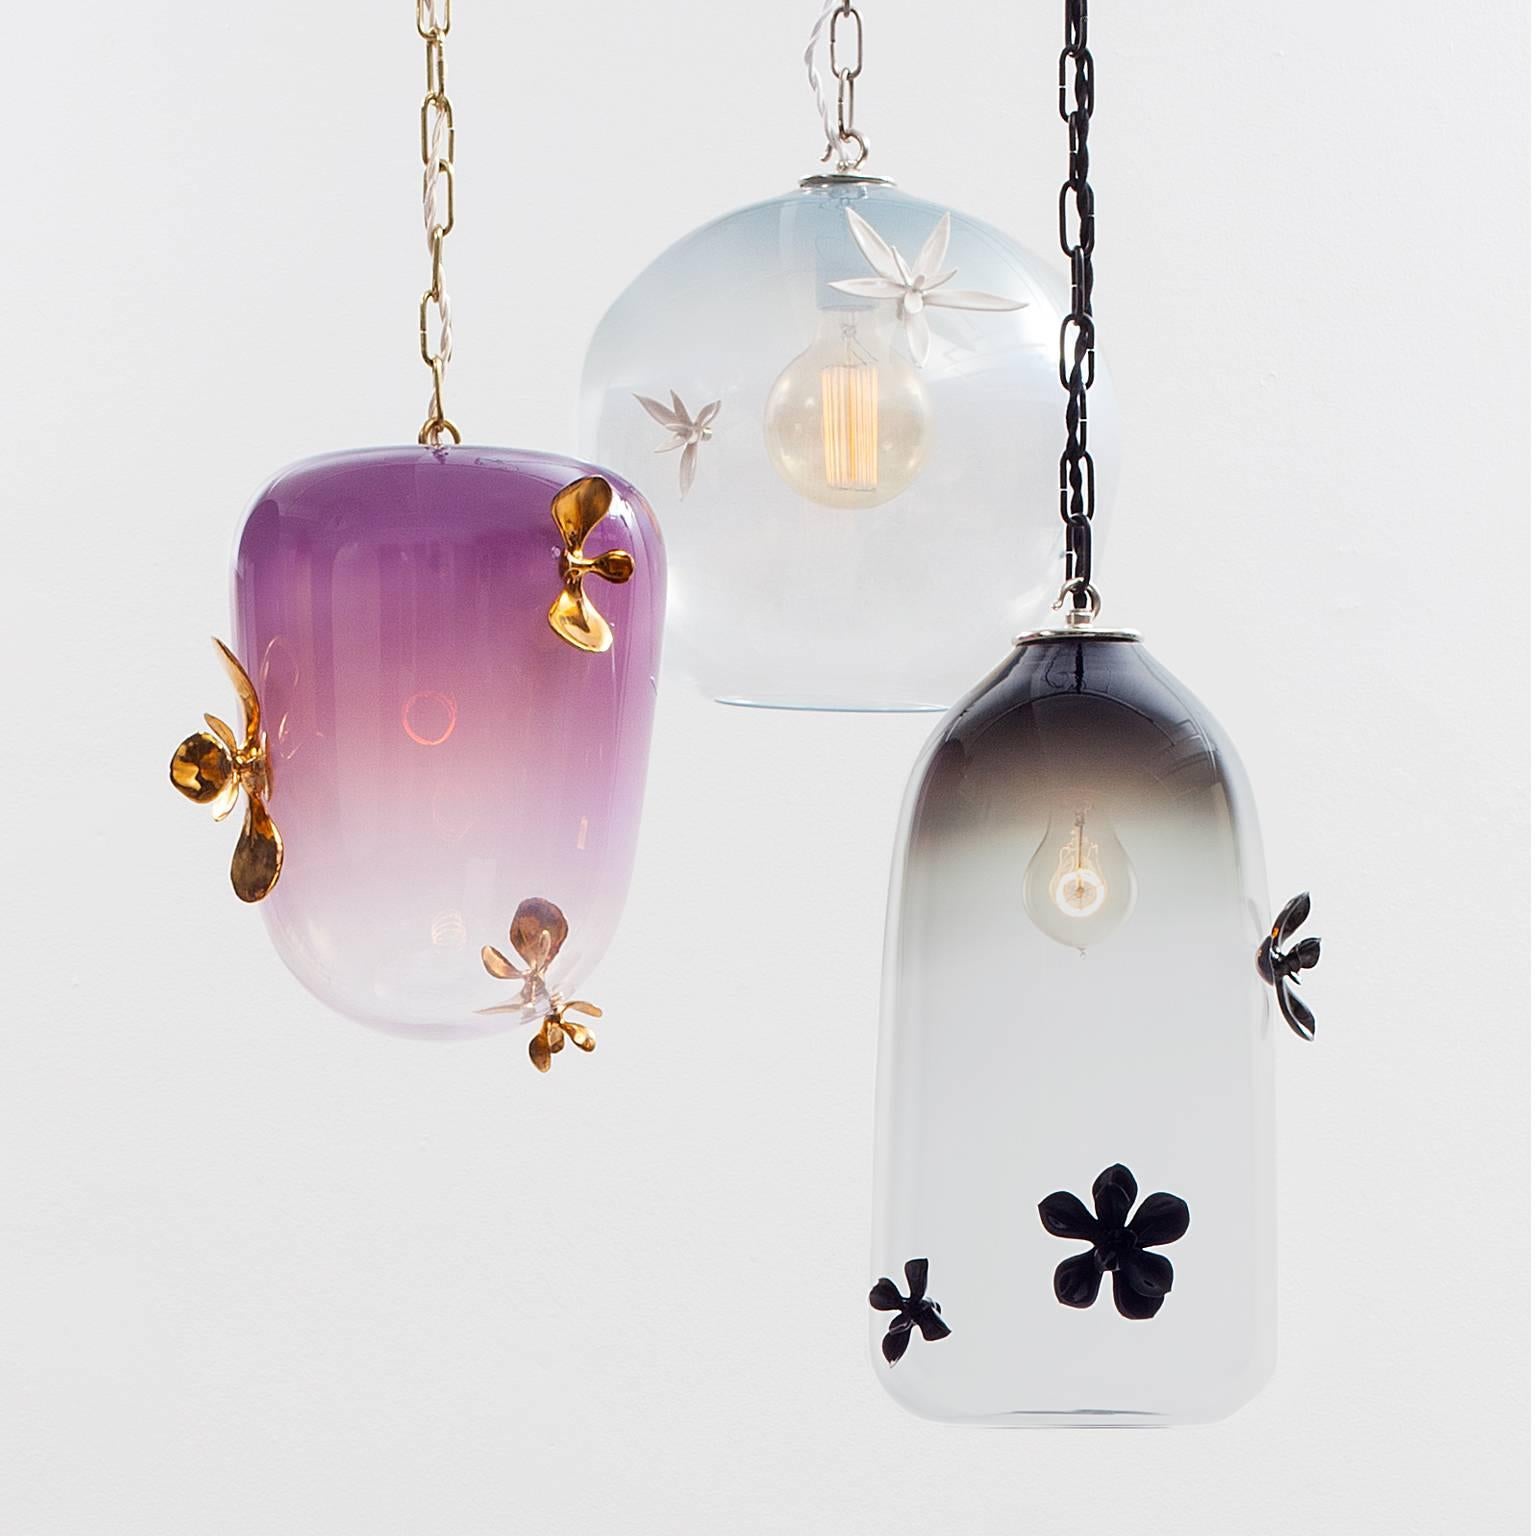 The Gia lighting collection consists of hand blown glass adorned with hand built porcelain plants. The glass pieces are offered in three forms: globe, lantern or bell.  The handcrafted porcelain ornaments are cast from live succulent plants. The